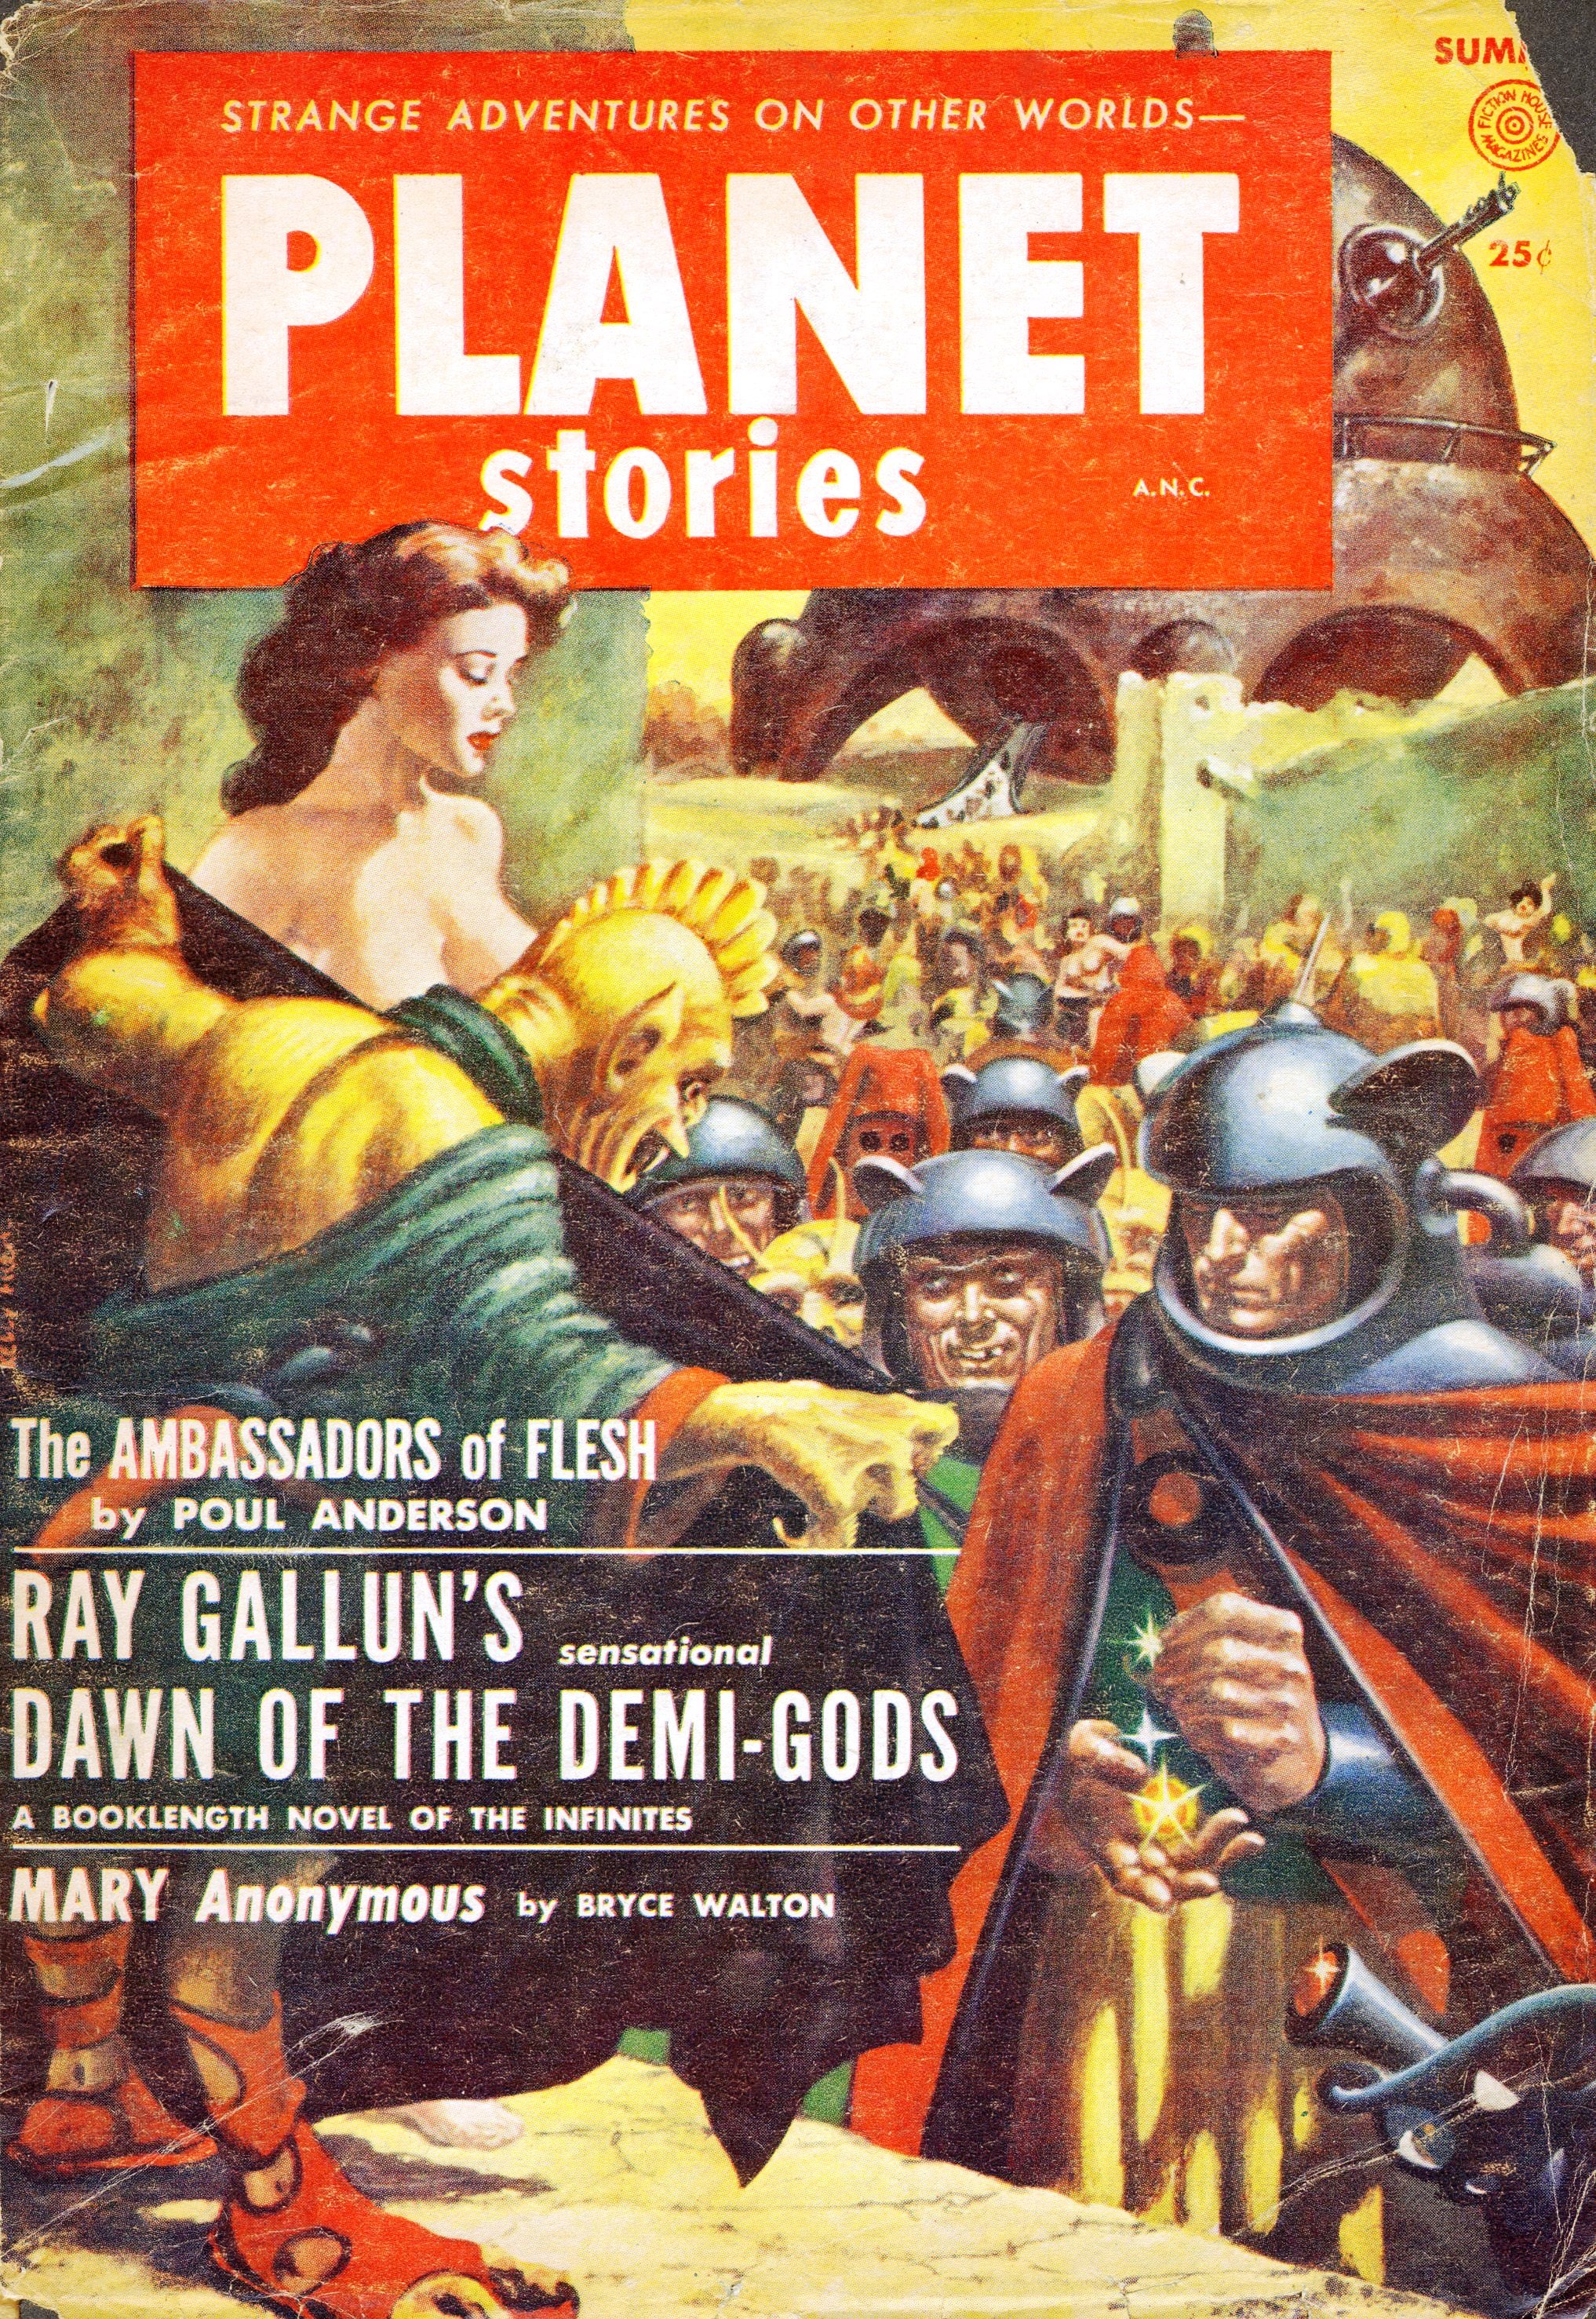 Image - cover of Planet Stories, Summer 1954